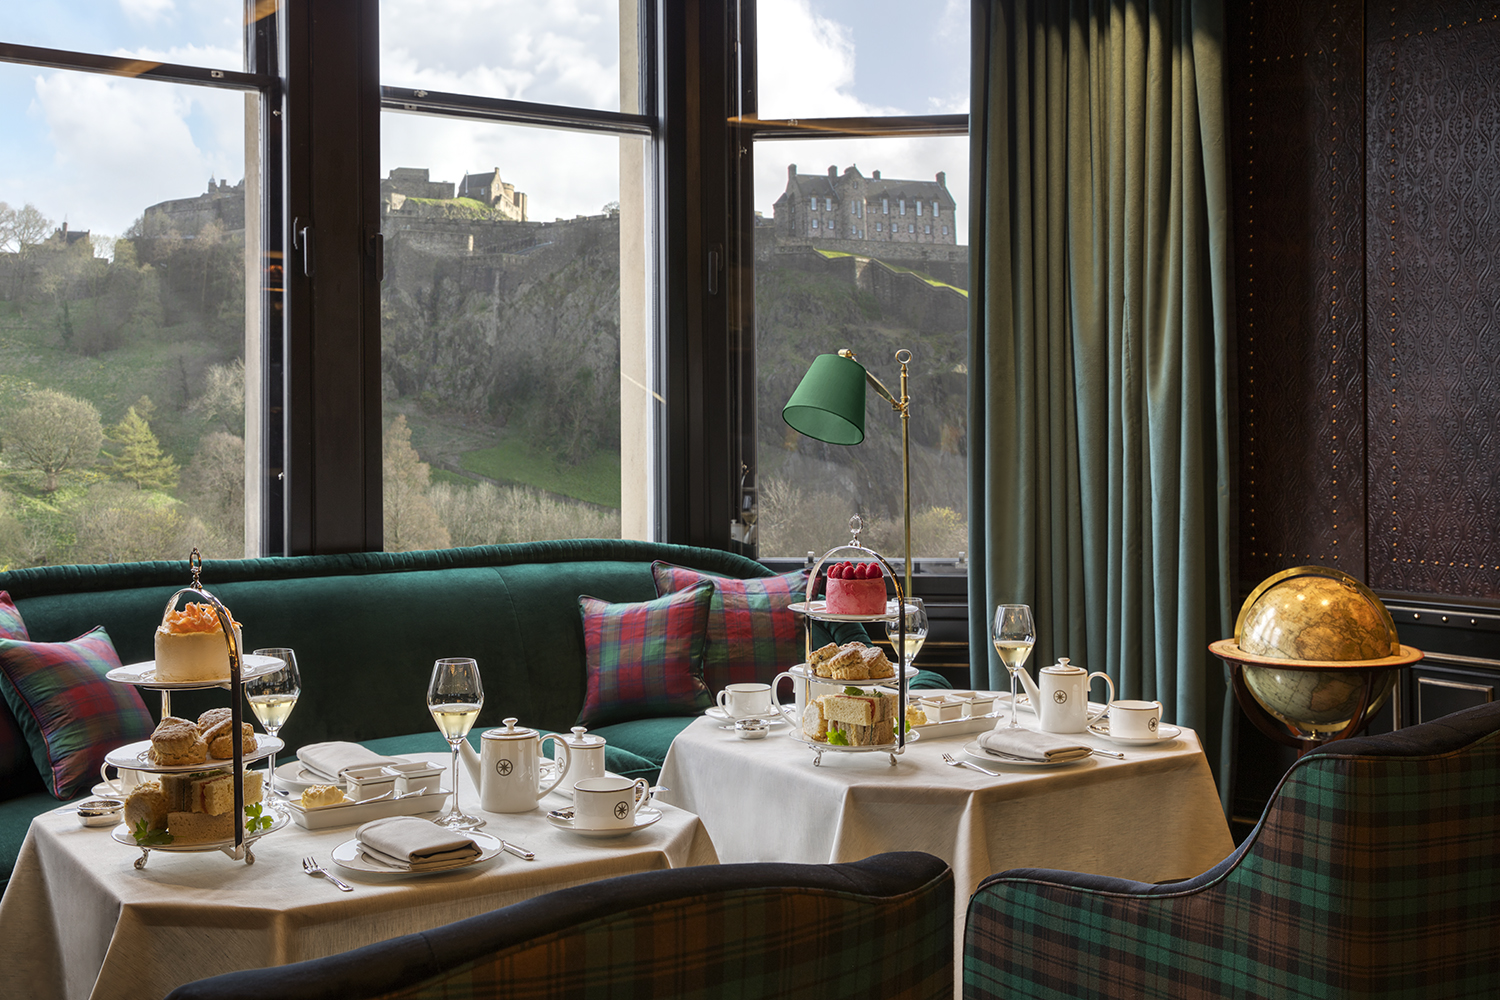 Views of Edinburgh Castle from inside The Wallace restaurant at new Scotland hotel 100 Princes Street.